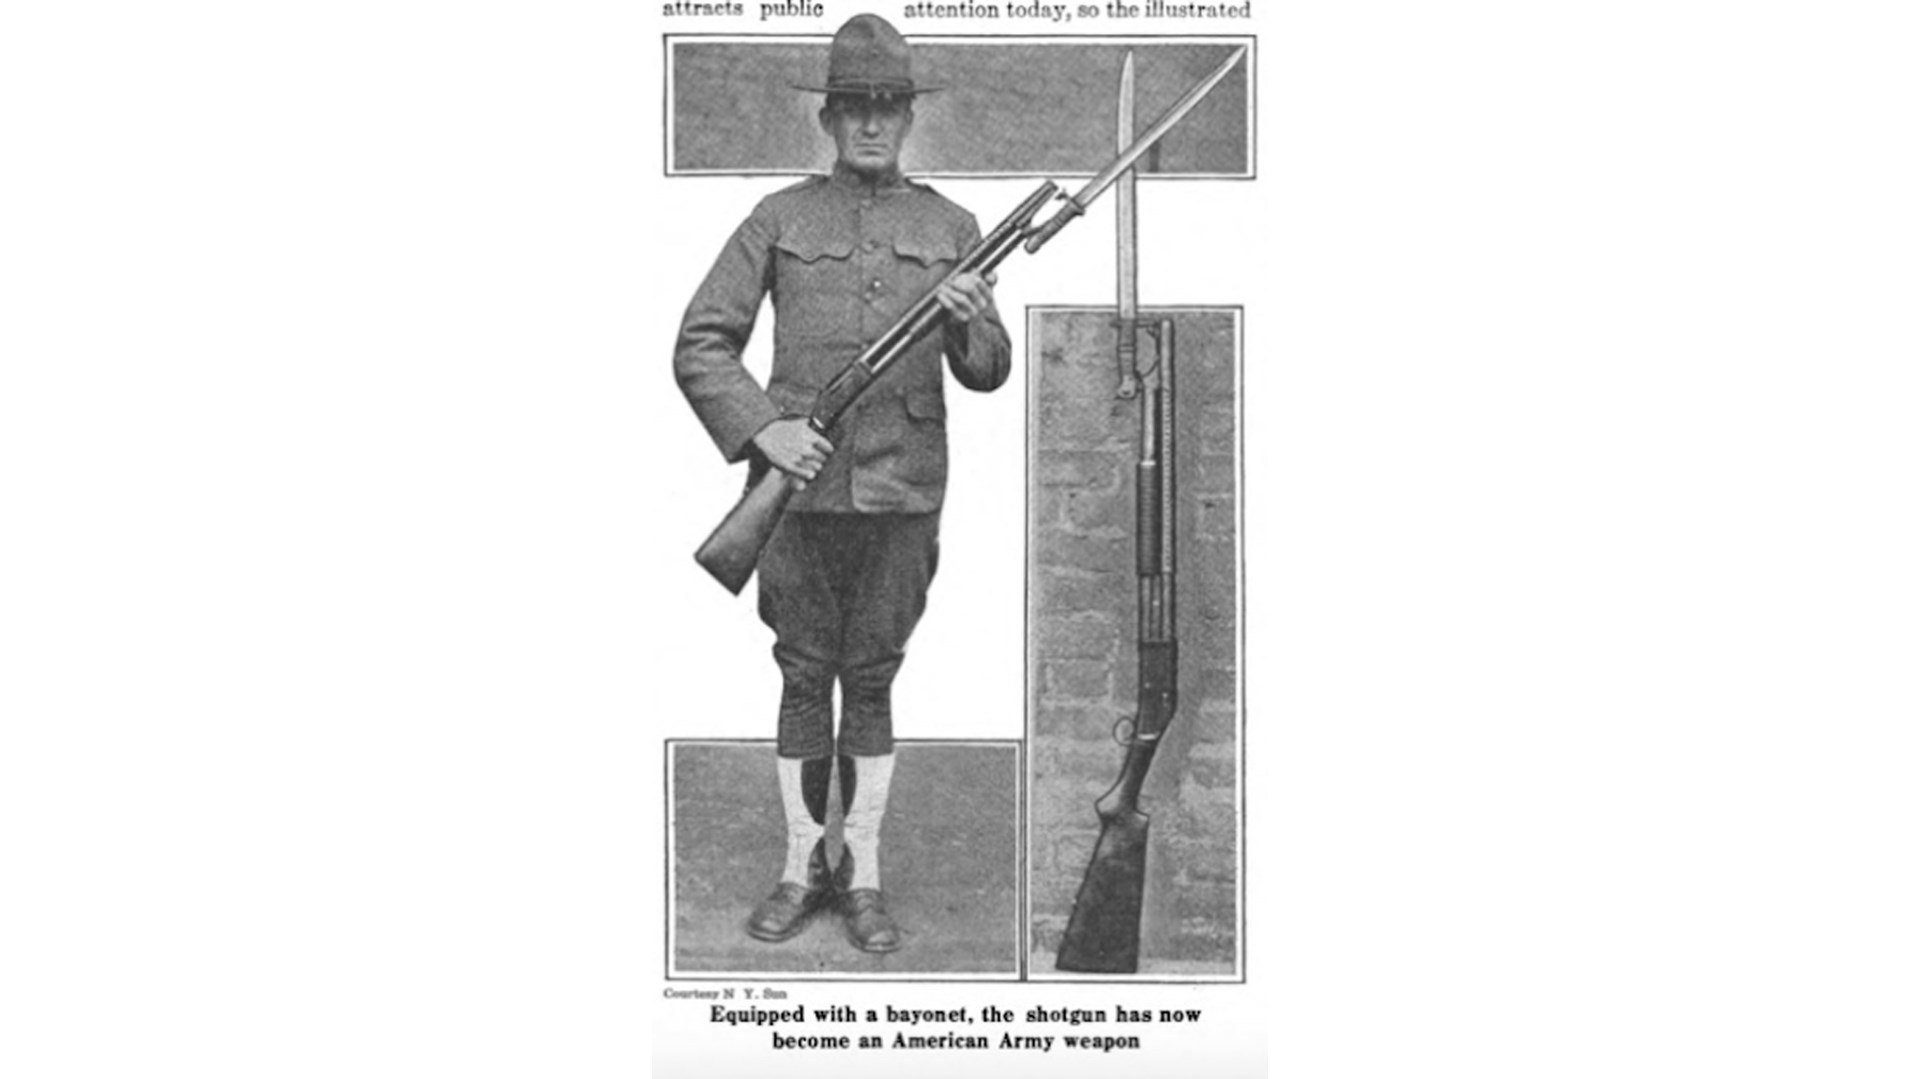 In the spring of 1918 the American press began running stories about the adoption of riot guns with bayonet adapters. This publicity photo, published in May 1918 by the Scientific American, shows a likely stateside soldier holding an M1897 Winchester riot gun with bayonet at port arms.